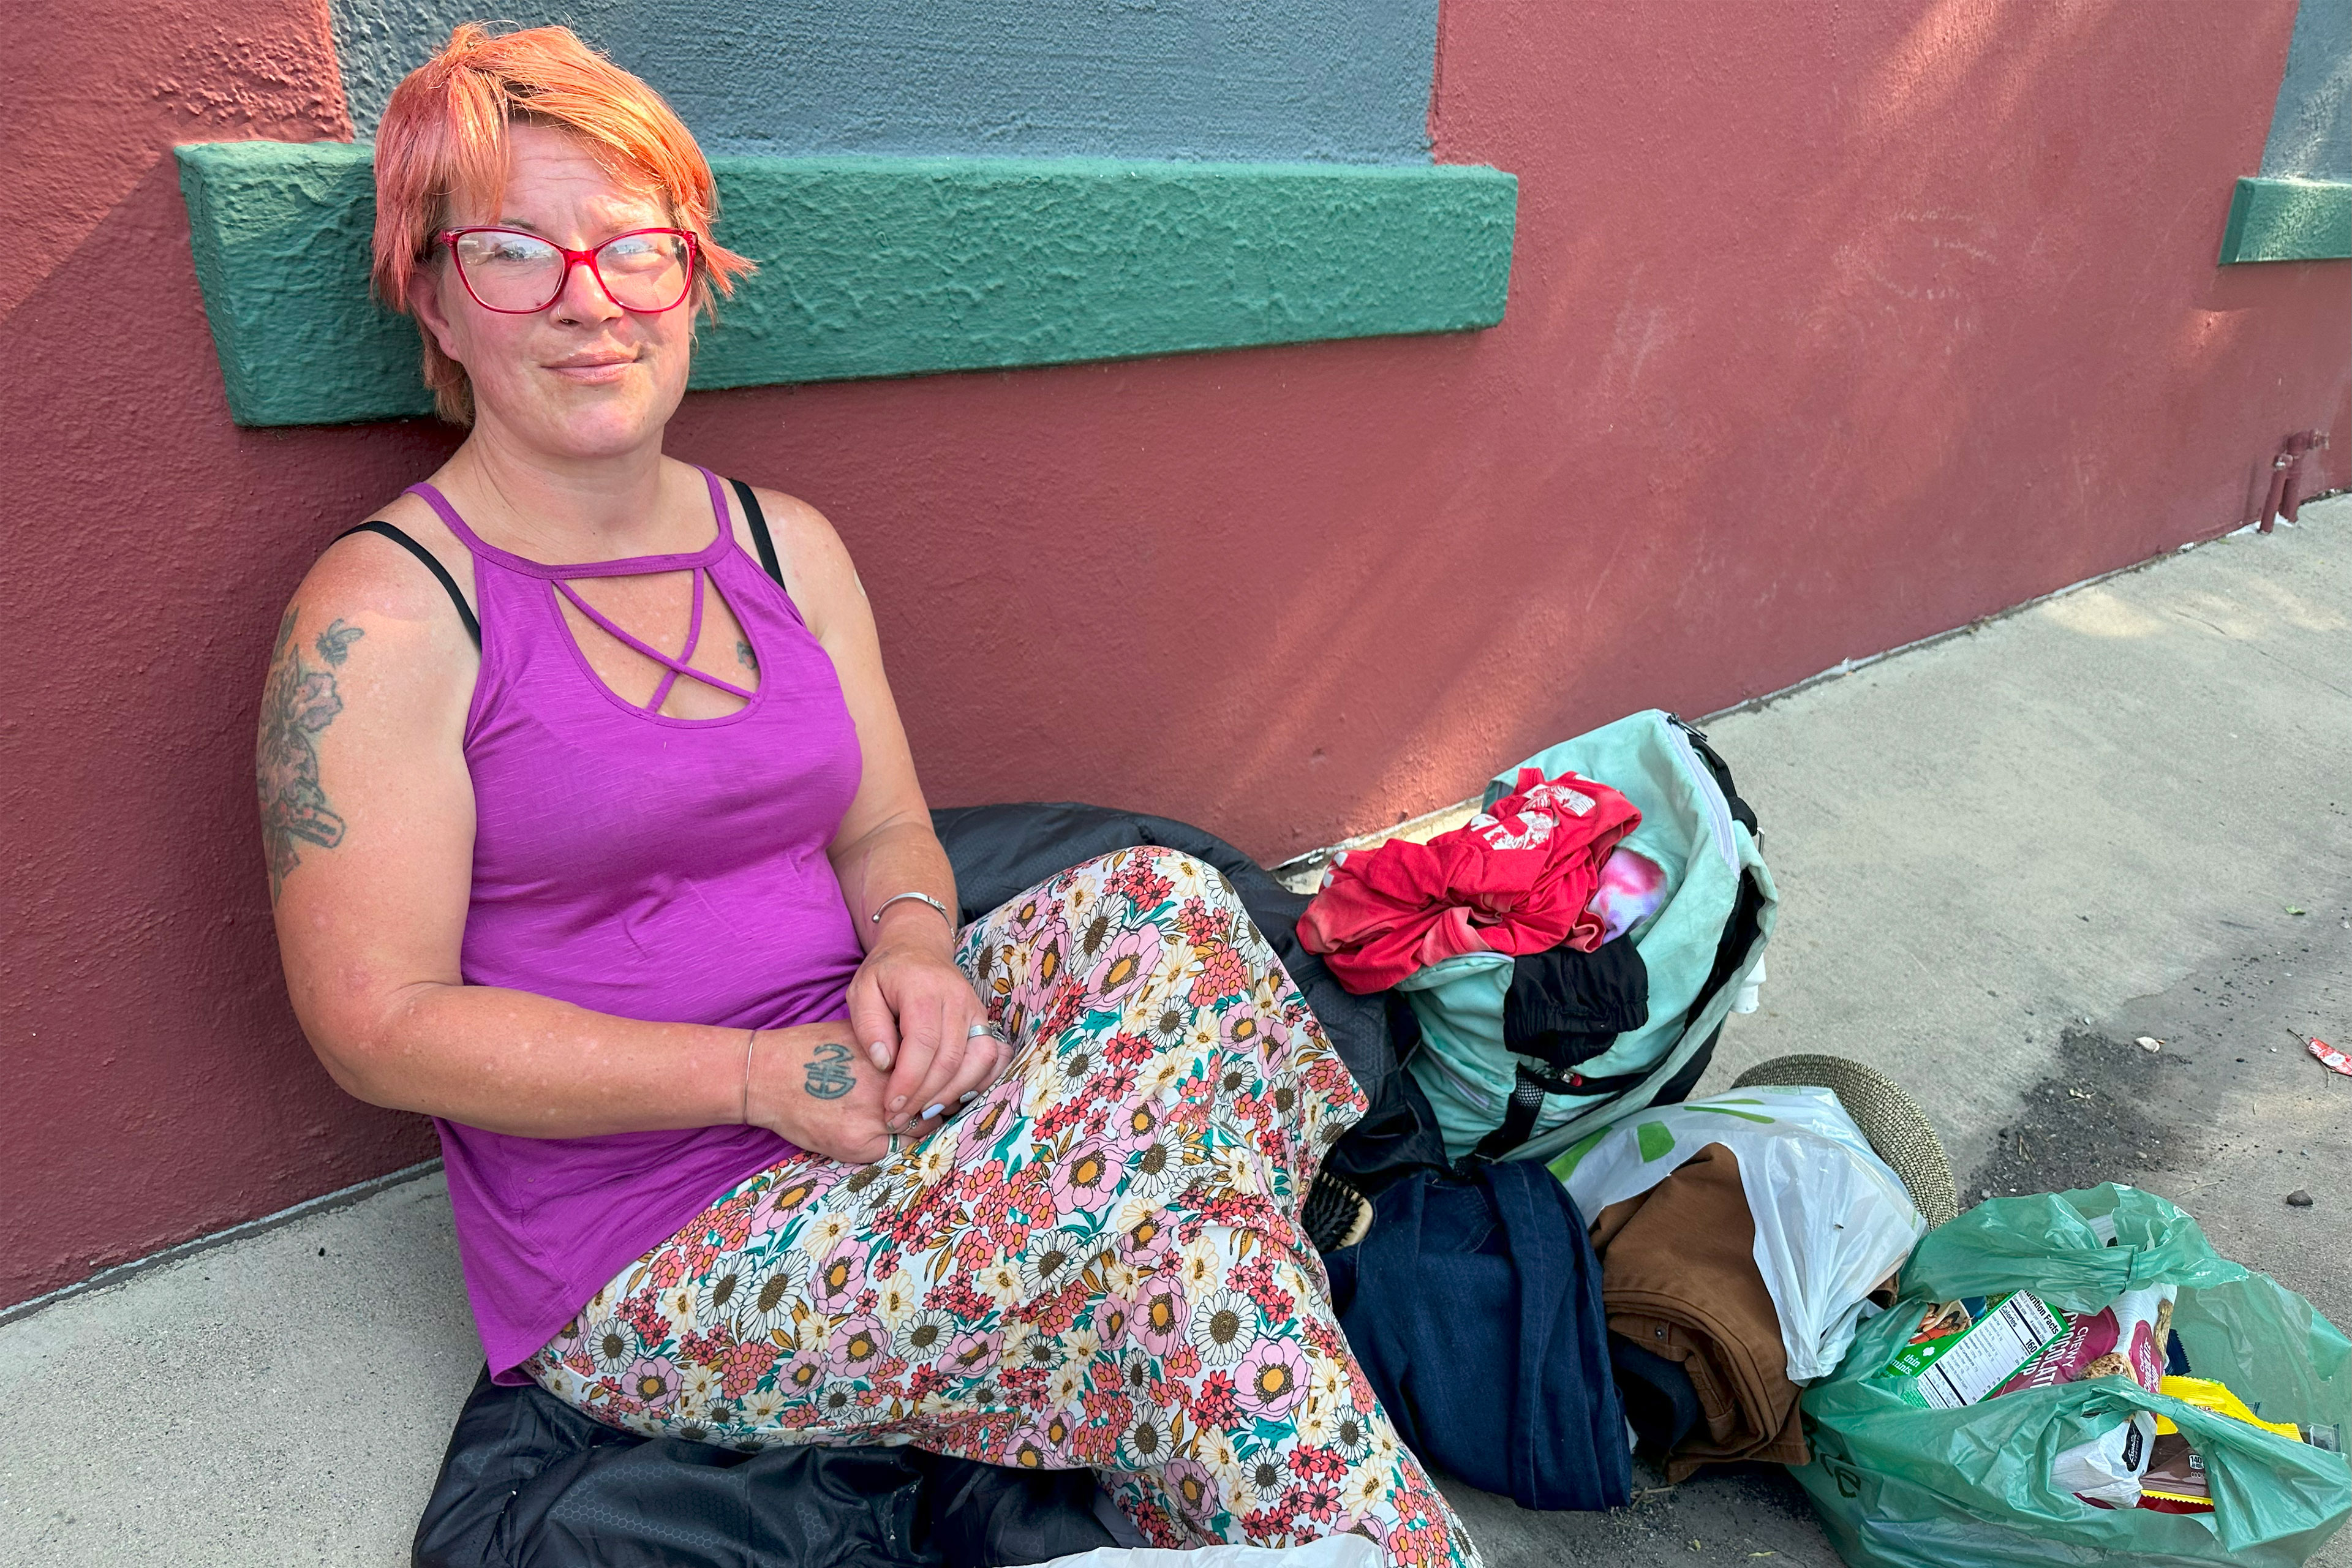 A woman sits on a jacket on a sidewalk and leans against a building. She has short hair and wears red glasses, a purple tank top, and a long skirt with a flower print. There are a few bags beside her.